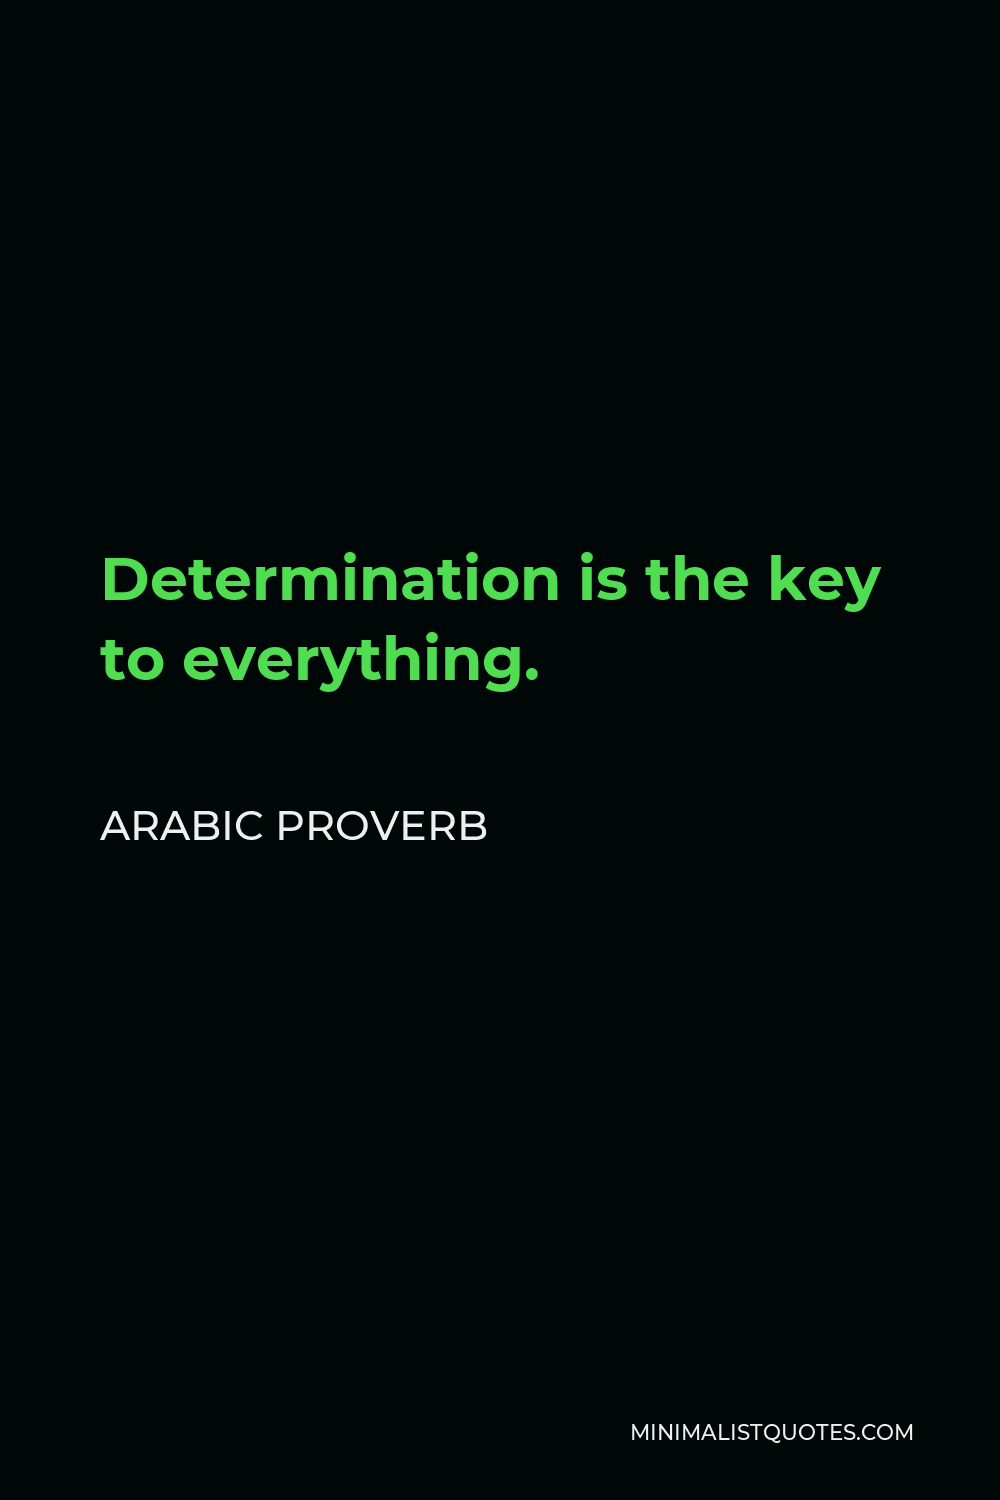 Arabic Proverb Quote - Determination is the key to everything.